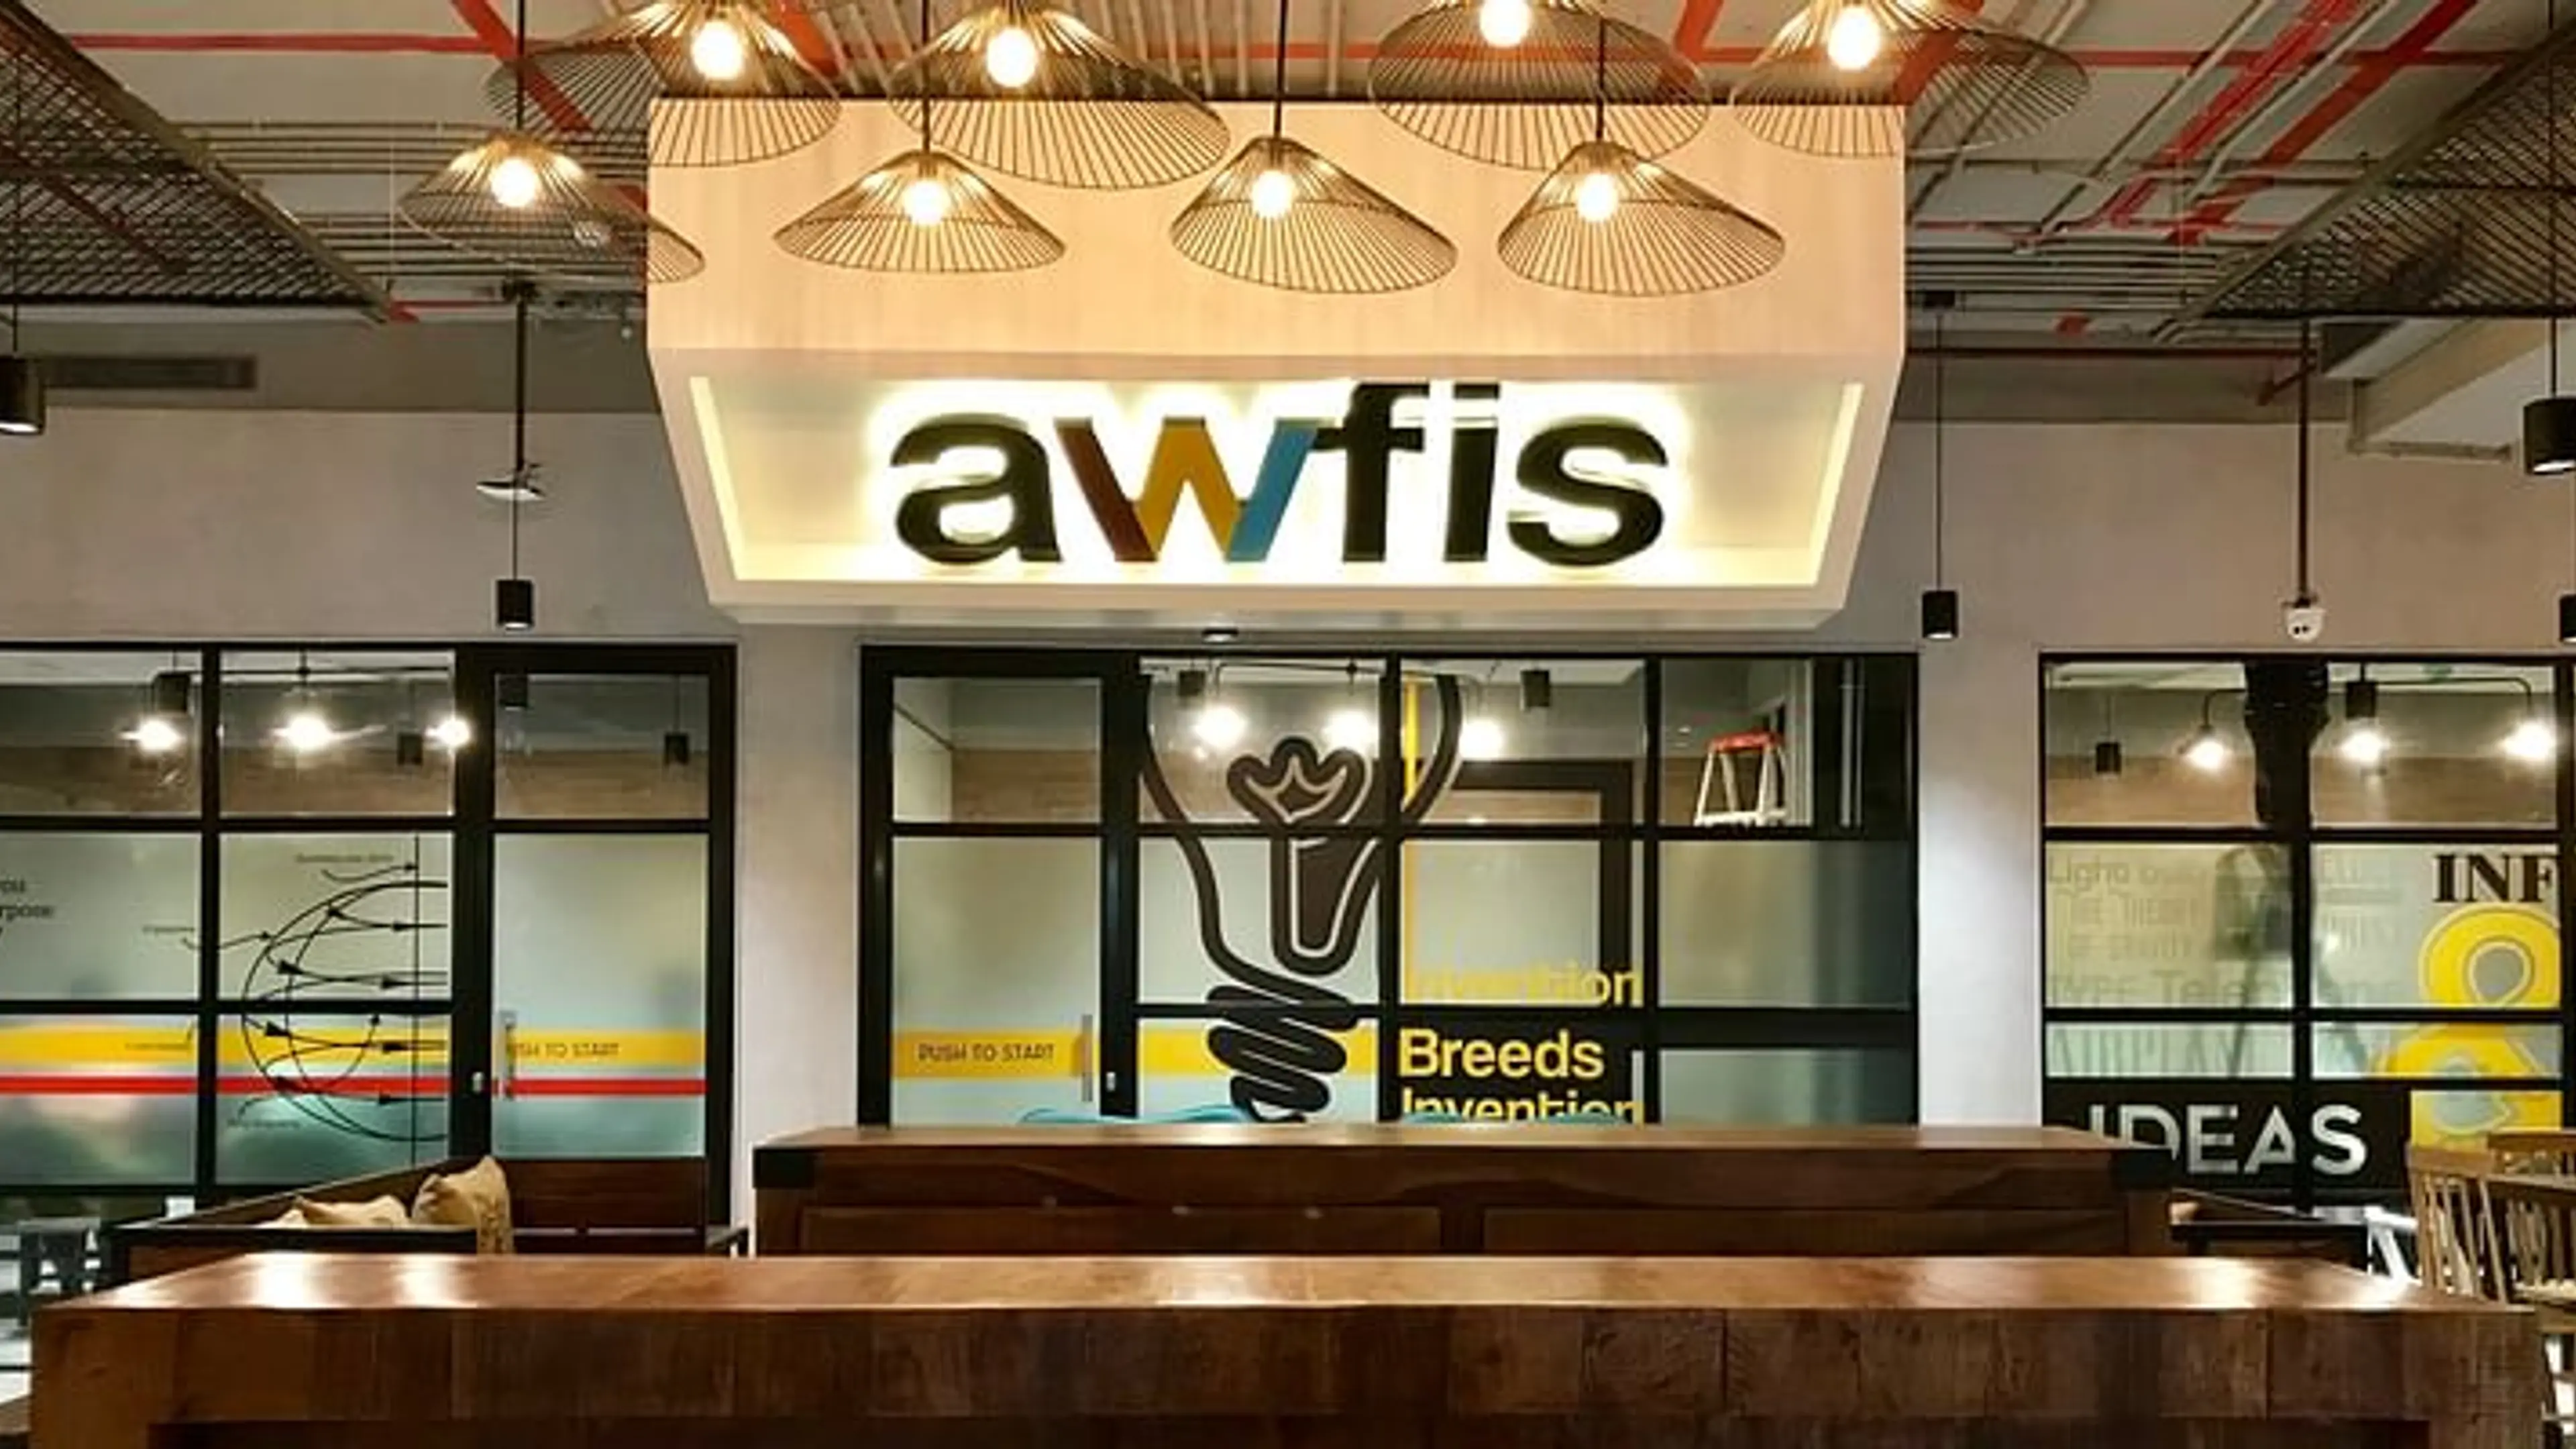 Awfis IPO priced at Rs 364–383 per share; employees get Rs 36 discount